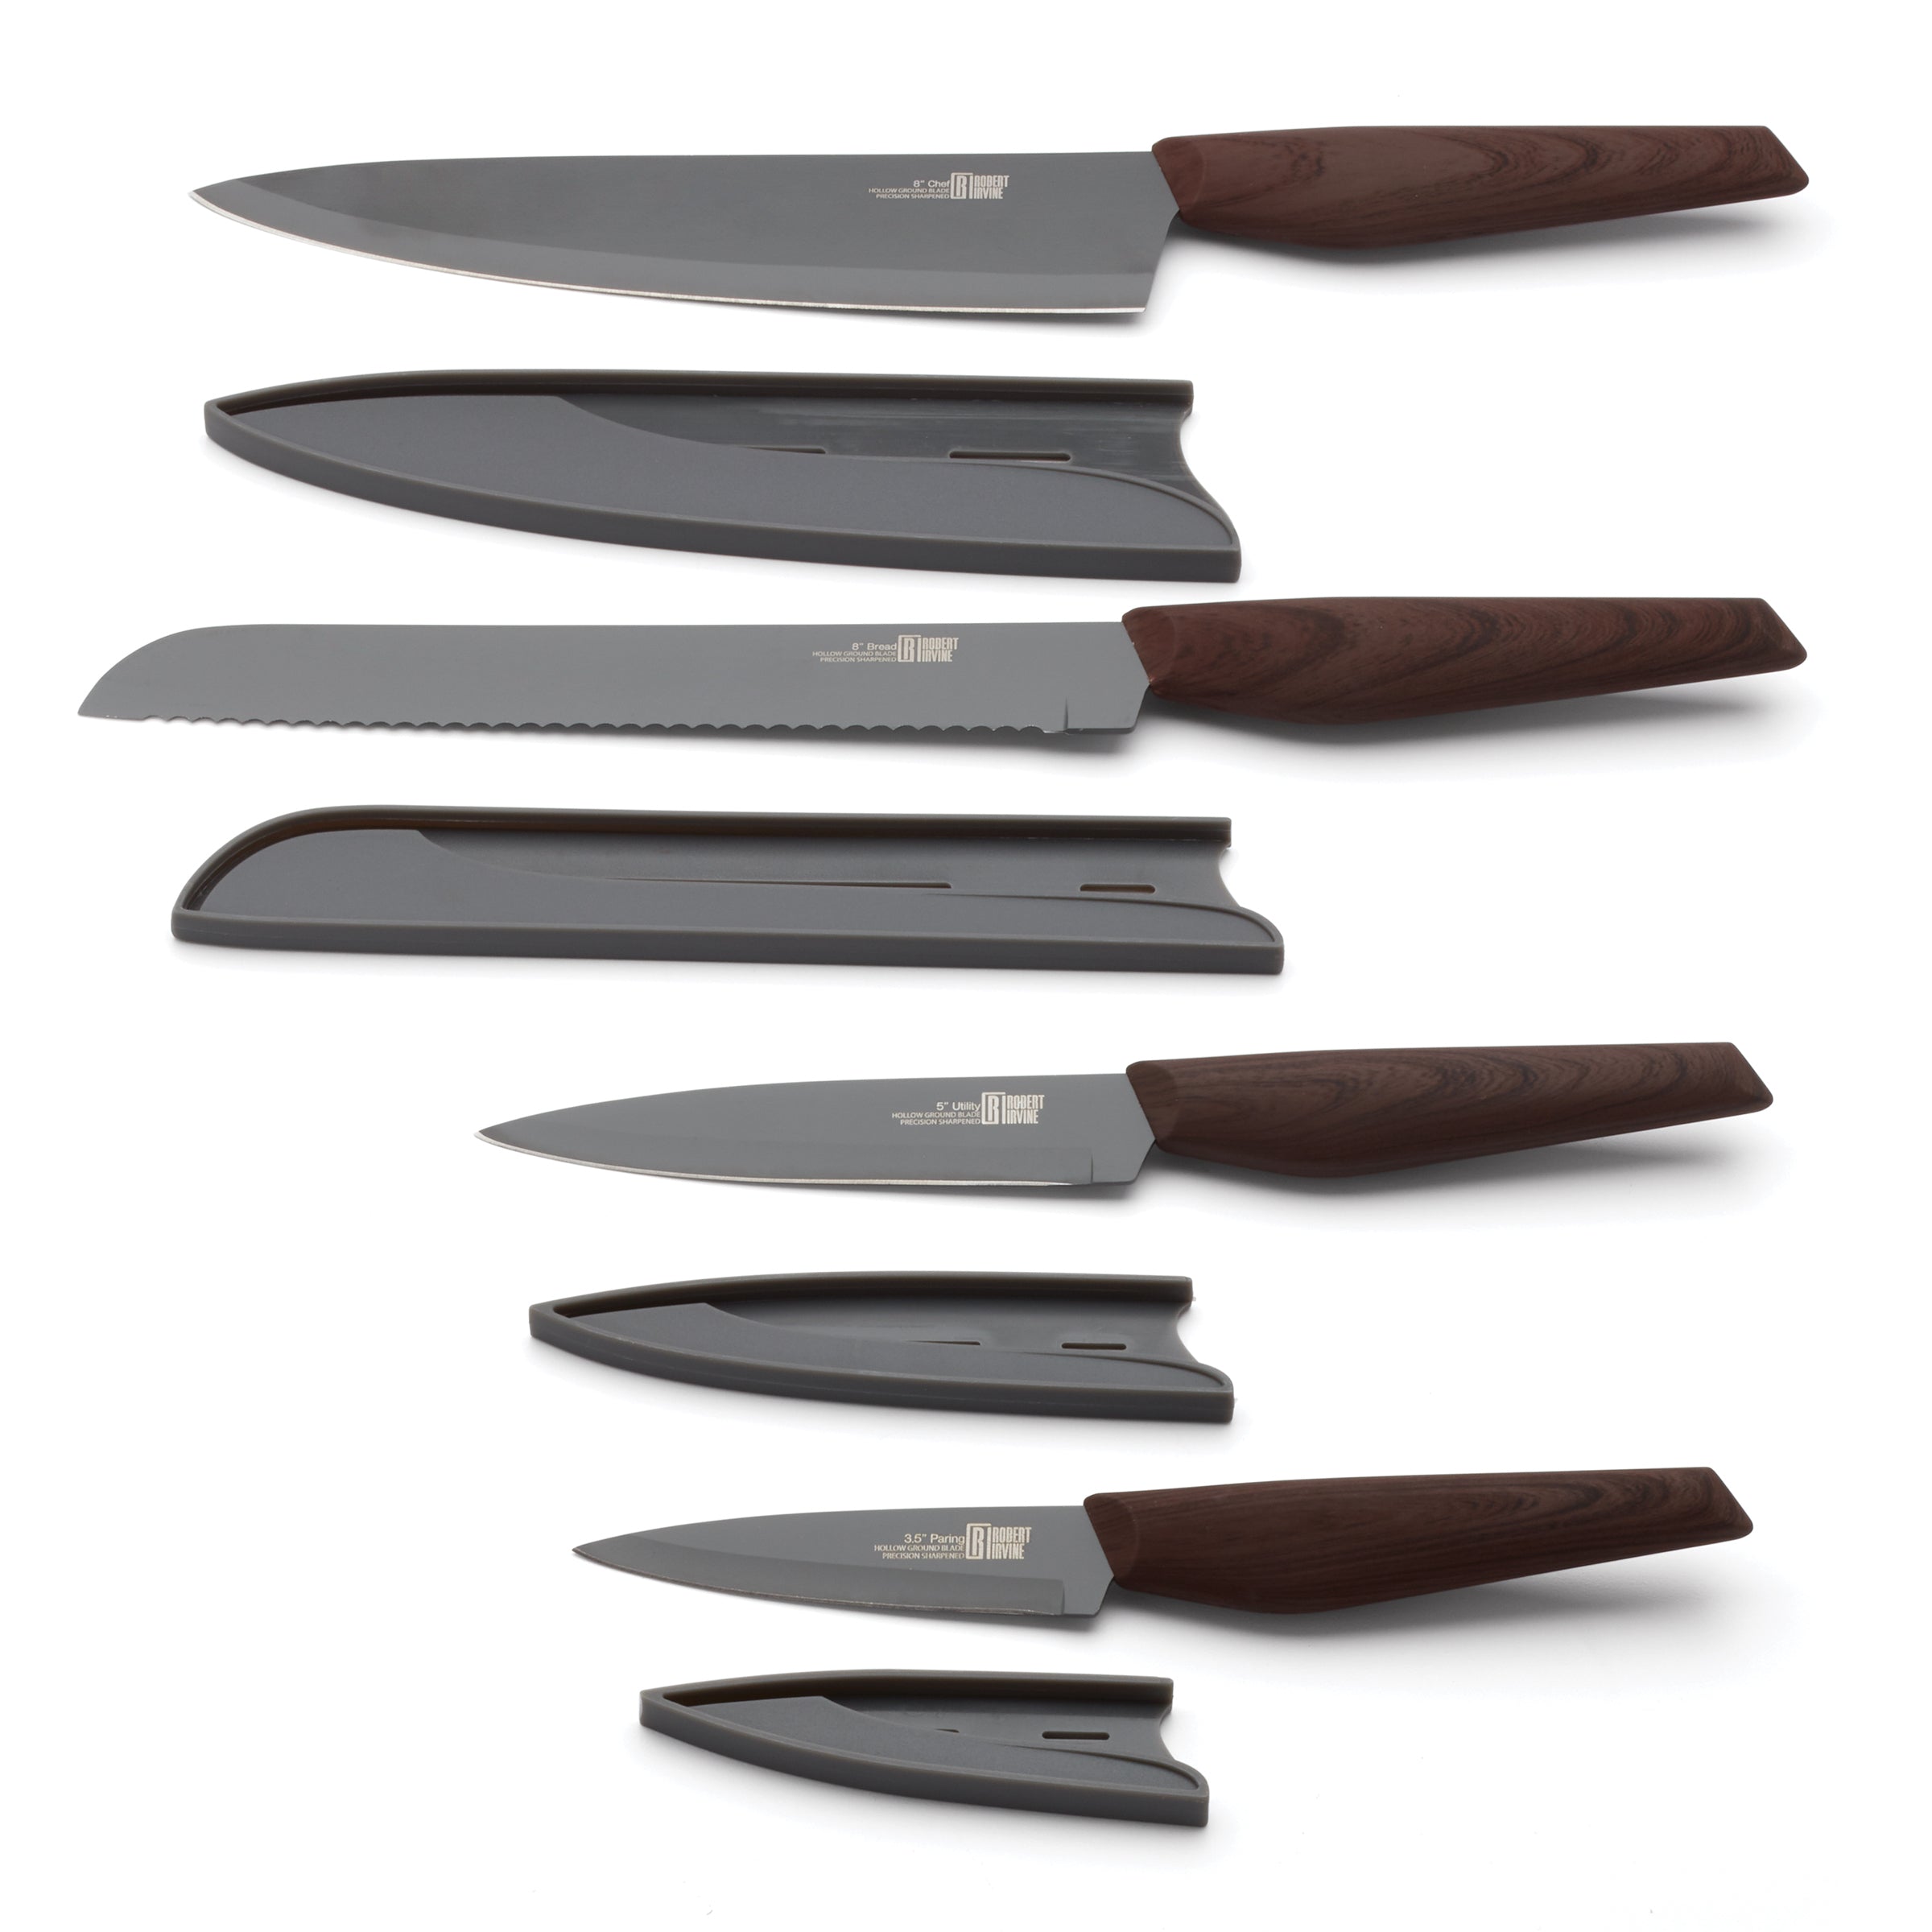 6 Piece Paring Knife & Sheath Set, Grey, Plastic Sold by at Home